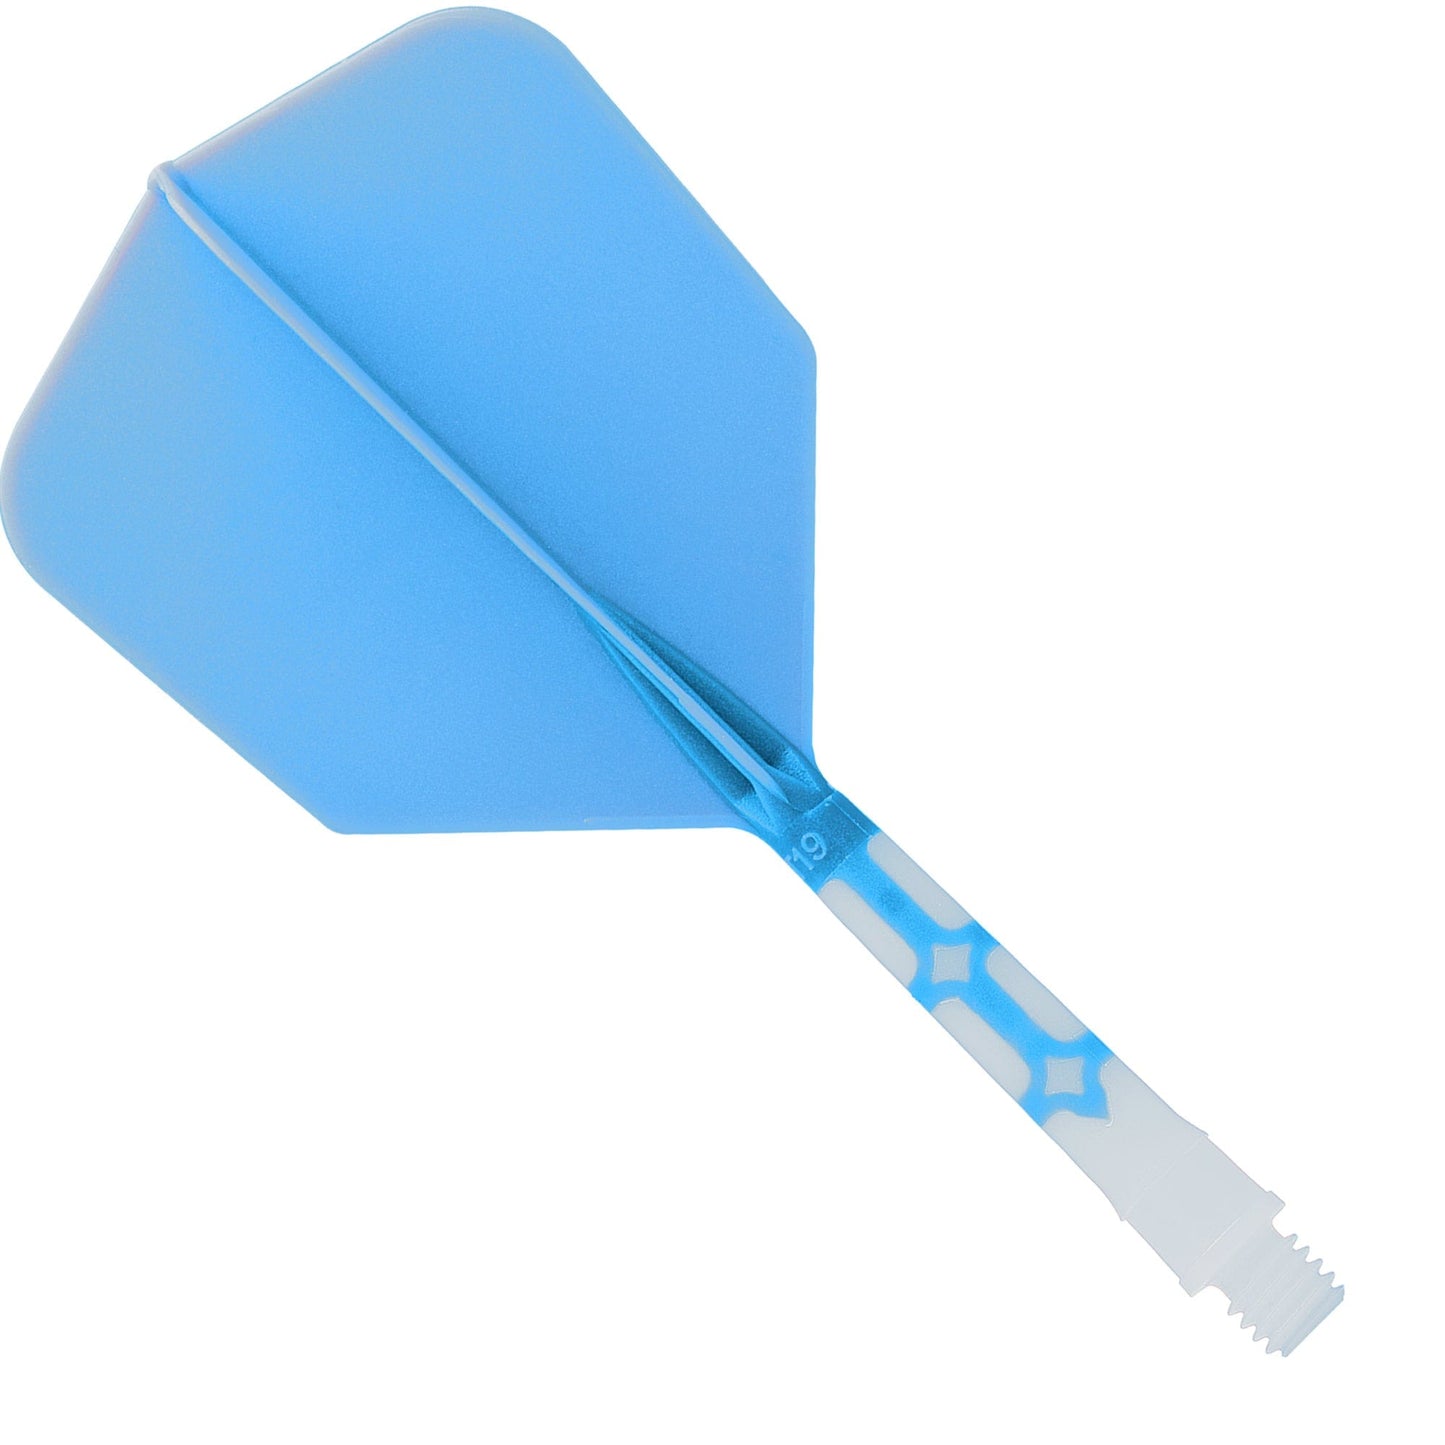 Cuesoul Rost T19 Integrated Dart Shaft and Flights - Big Wing - White with Blue Flight Medium